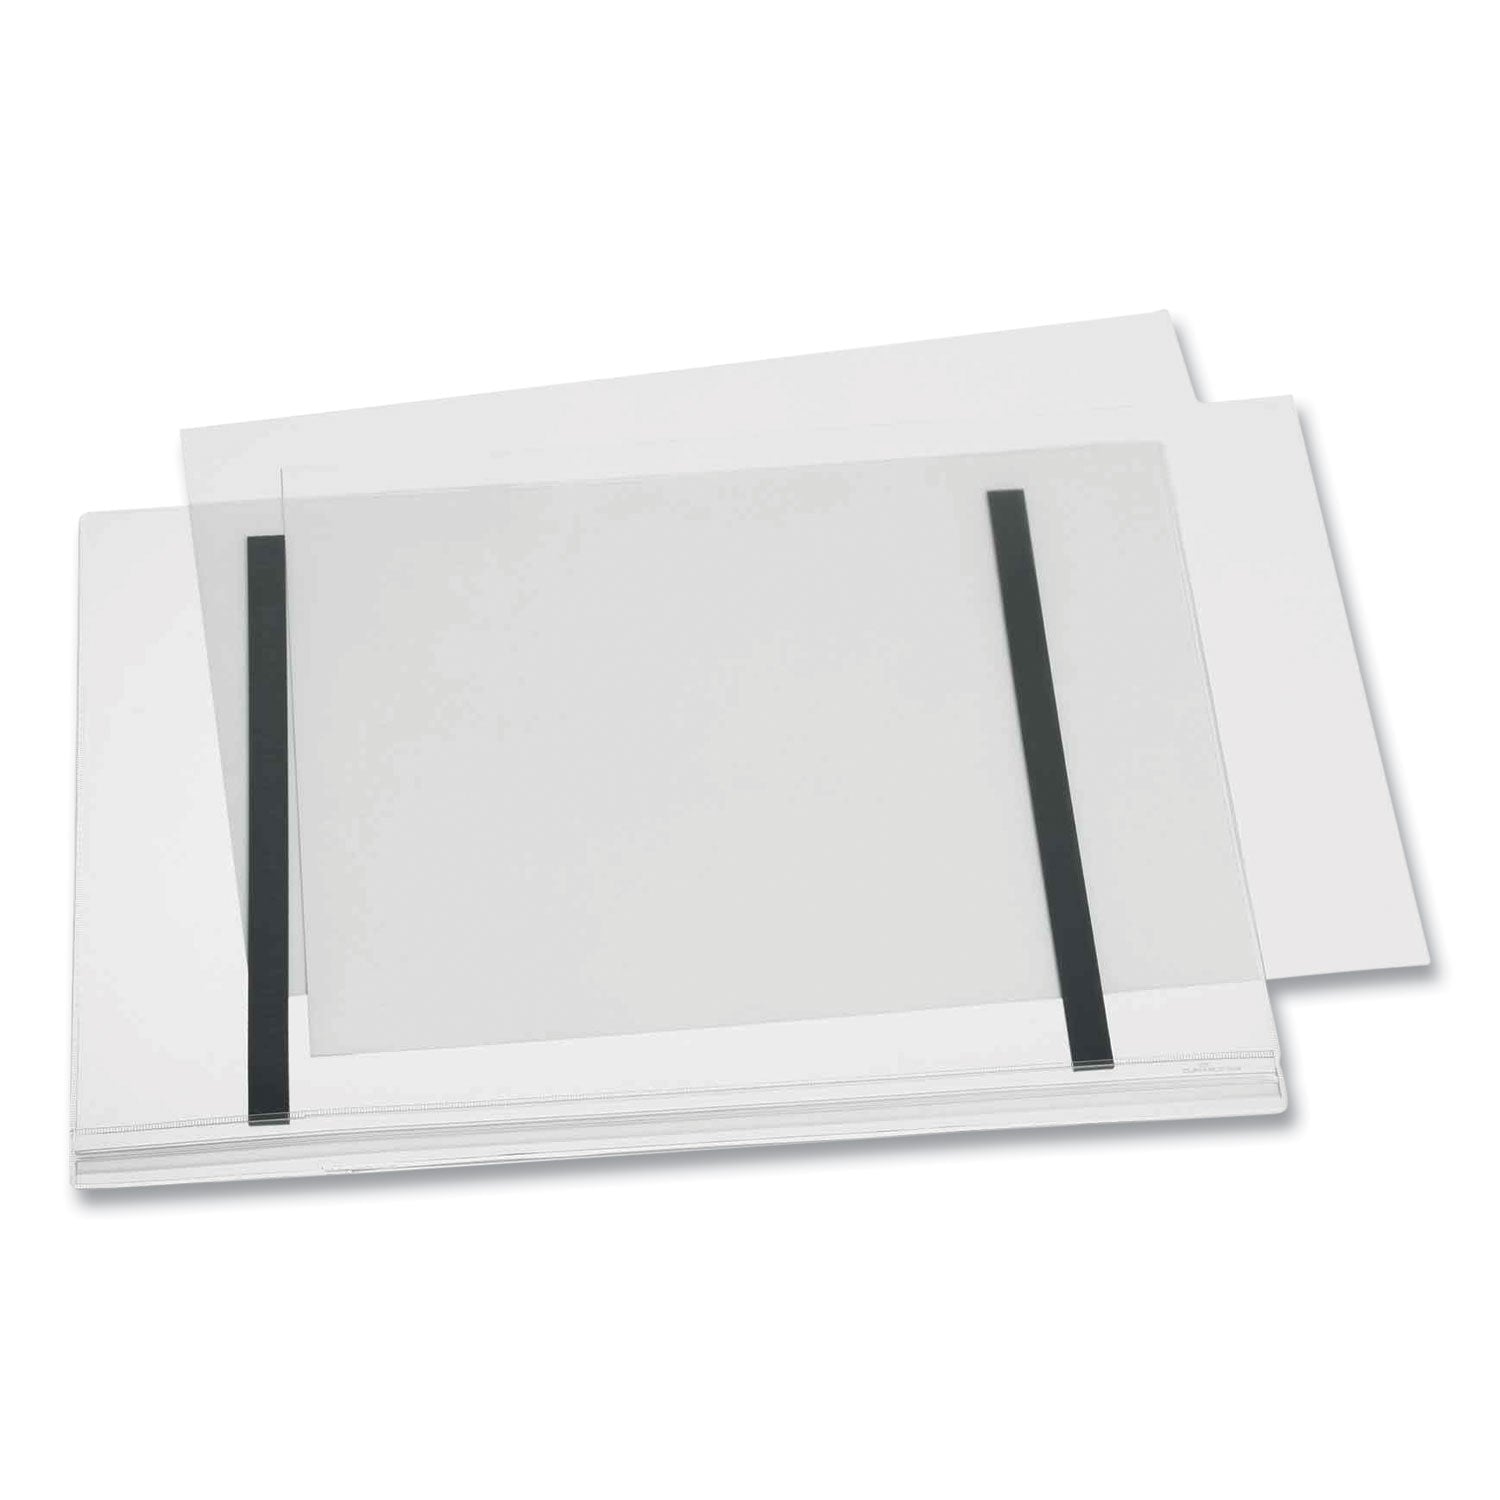 magnetic-water-resistant-sign-holder-11-x-17-clear-frame-5-pack_dbl501919 - 1